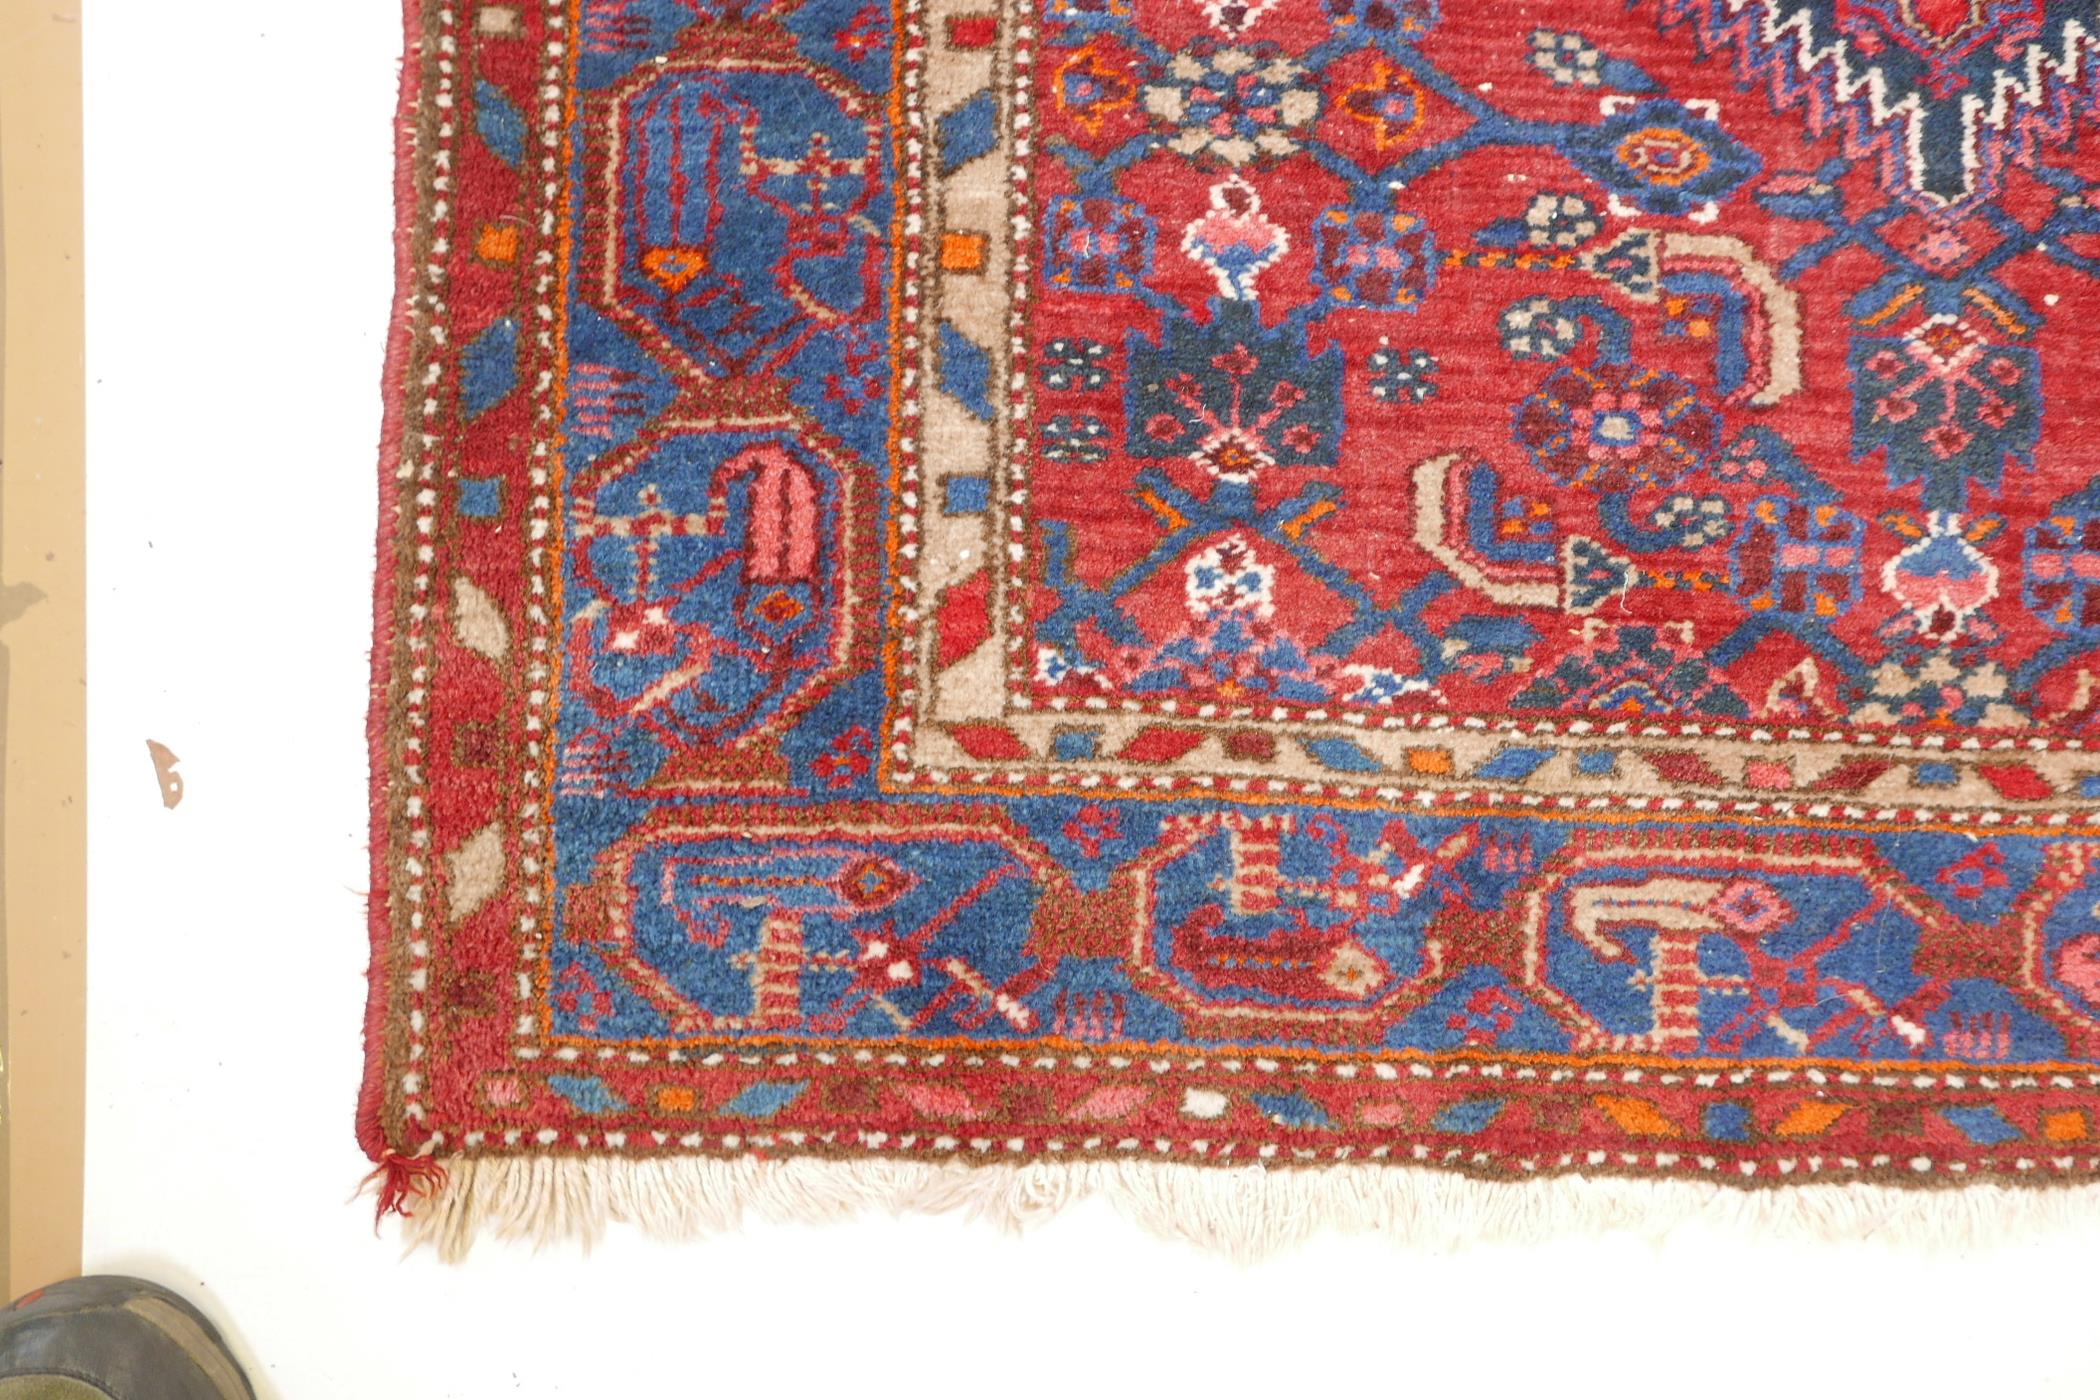 A Persian red ground wool carpet with a centralised medallion design on a blue border, 52" x 80" - Image 3 of 4